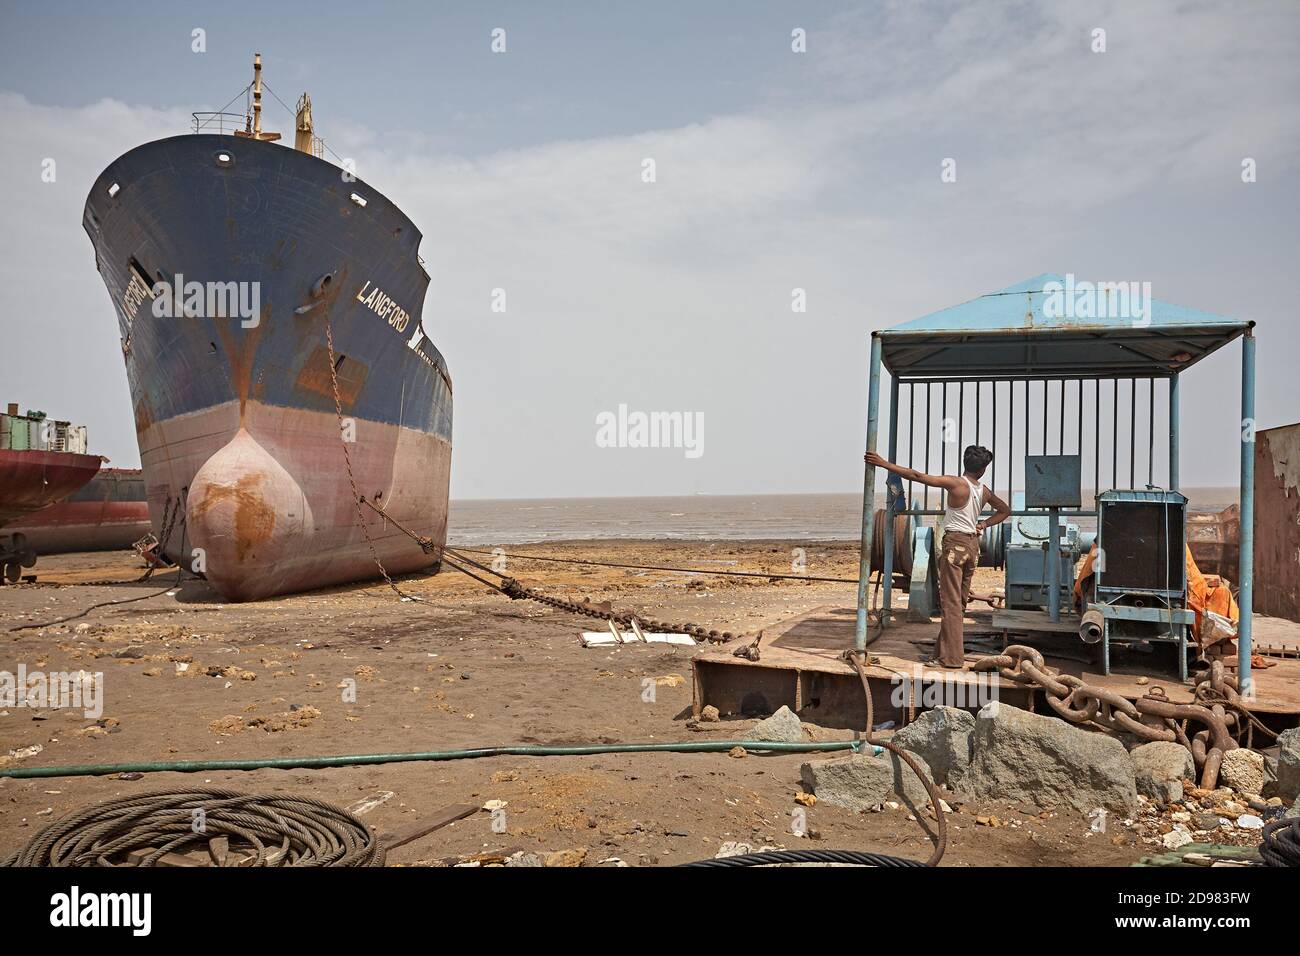 Alang, India, September 2008. Large tonnage cargo ship stranded on the beach waiting to be scrapped. Stock Photo